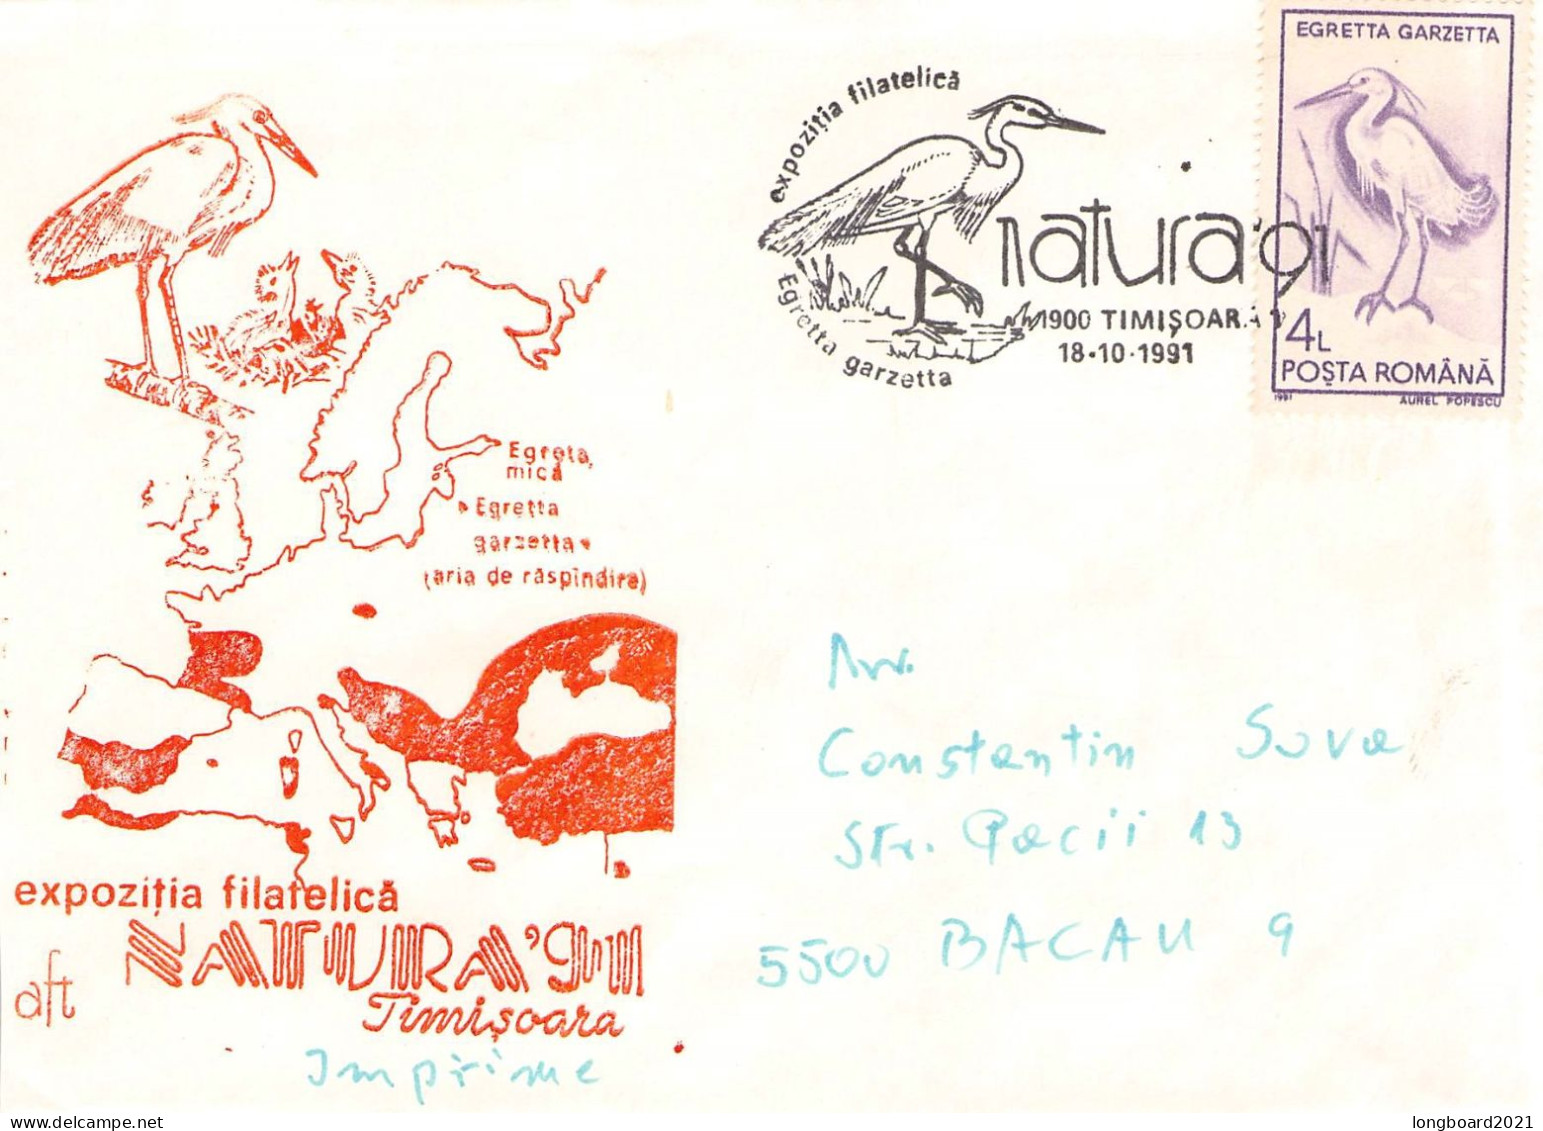 ROMANIA - SPECIAL COVER AND CANCELLATION 1991 NATURA '91 / 7056 - Lettres & Documents